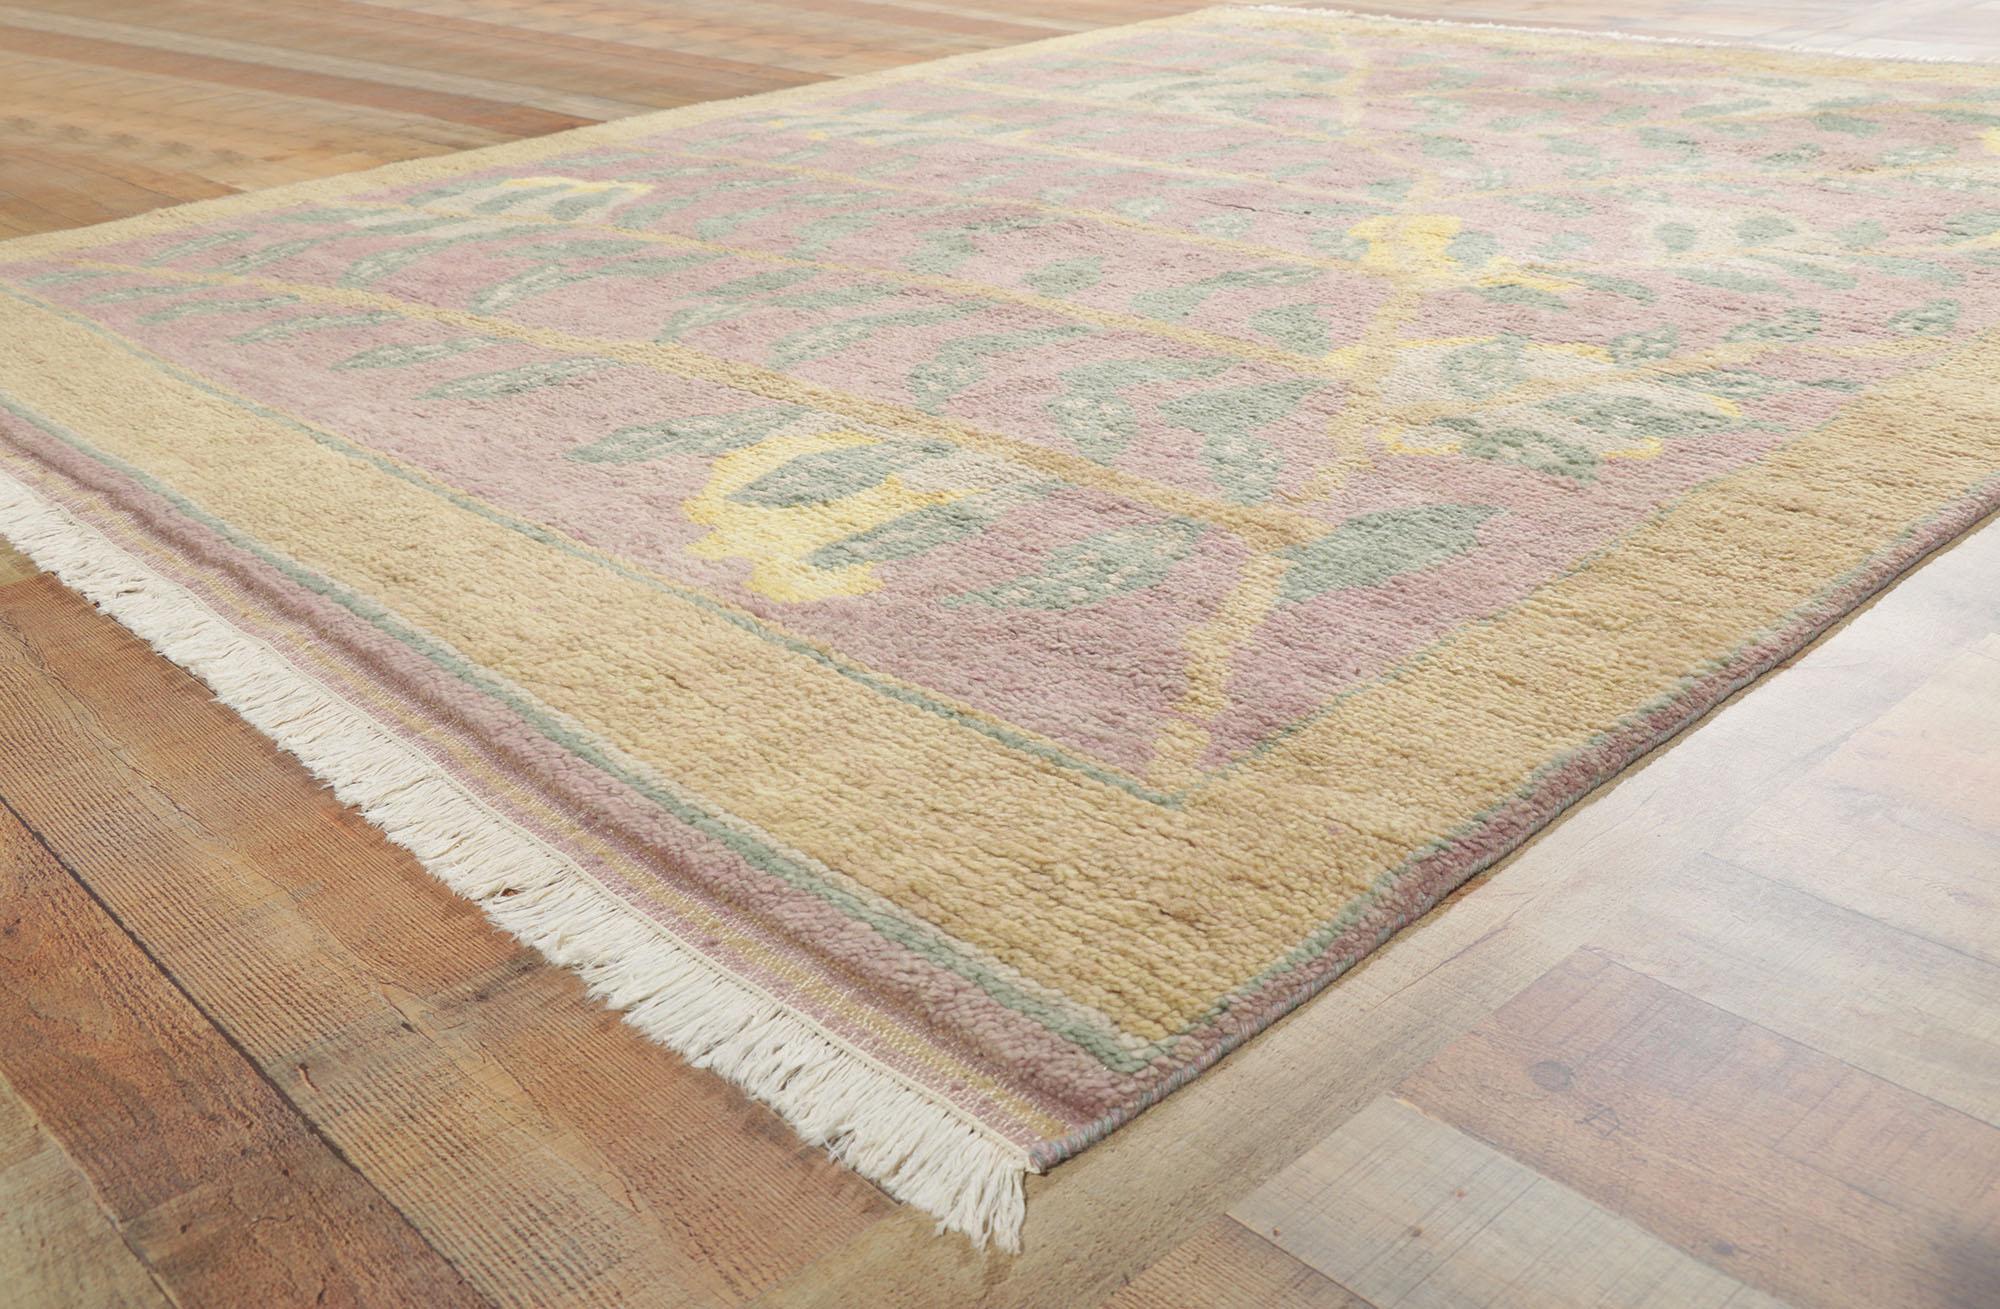 Nature-Inspired Modern Moroccan Style Rug, Biophilic Design Meets Modern Style In New Condition For Sale In Dallas, TX